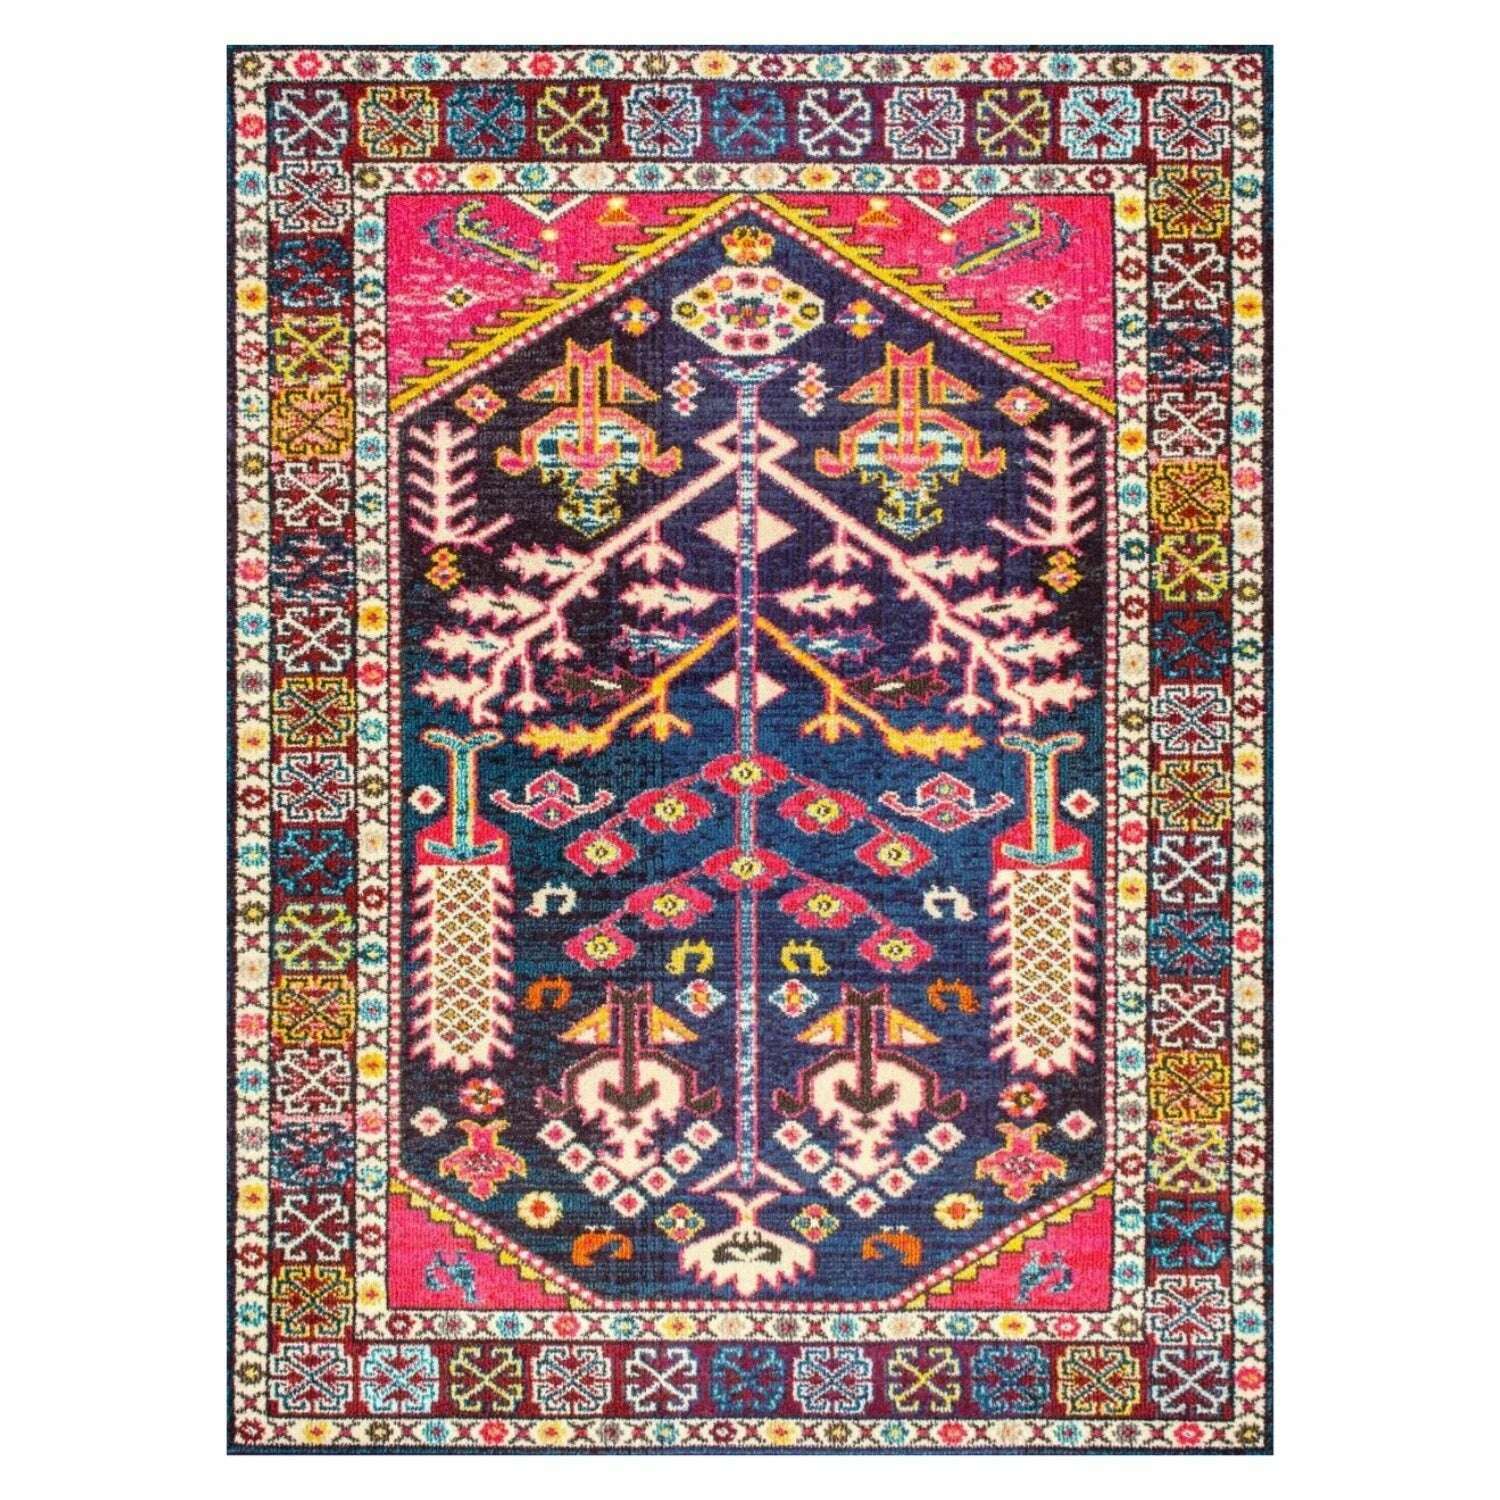 KIMLUD, Light Luxury Morocco Bedroom Carpet Persian Style Living Room Rugs American Coffee Table Mat Home Vintage Bedside Entrance Mats, 13 / 120x160cm, KIMLUD Womens Clothes